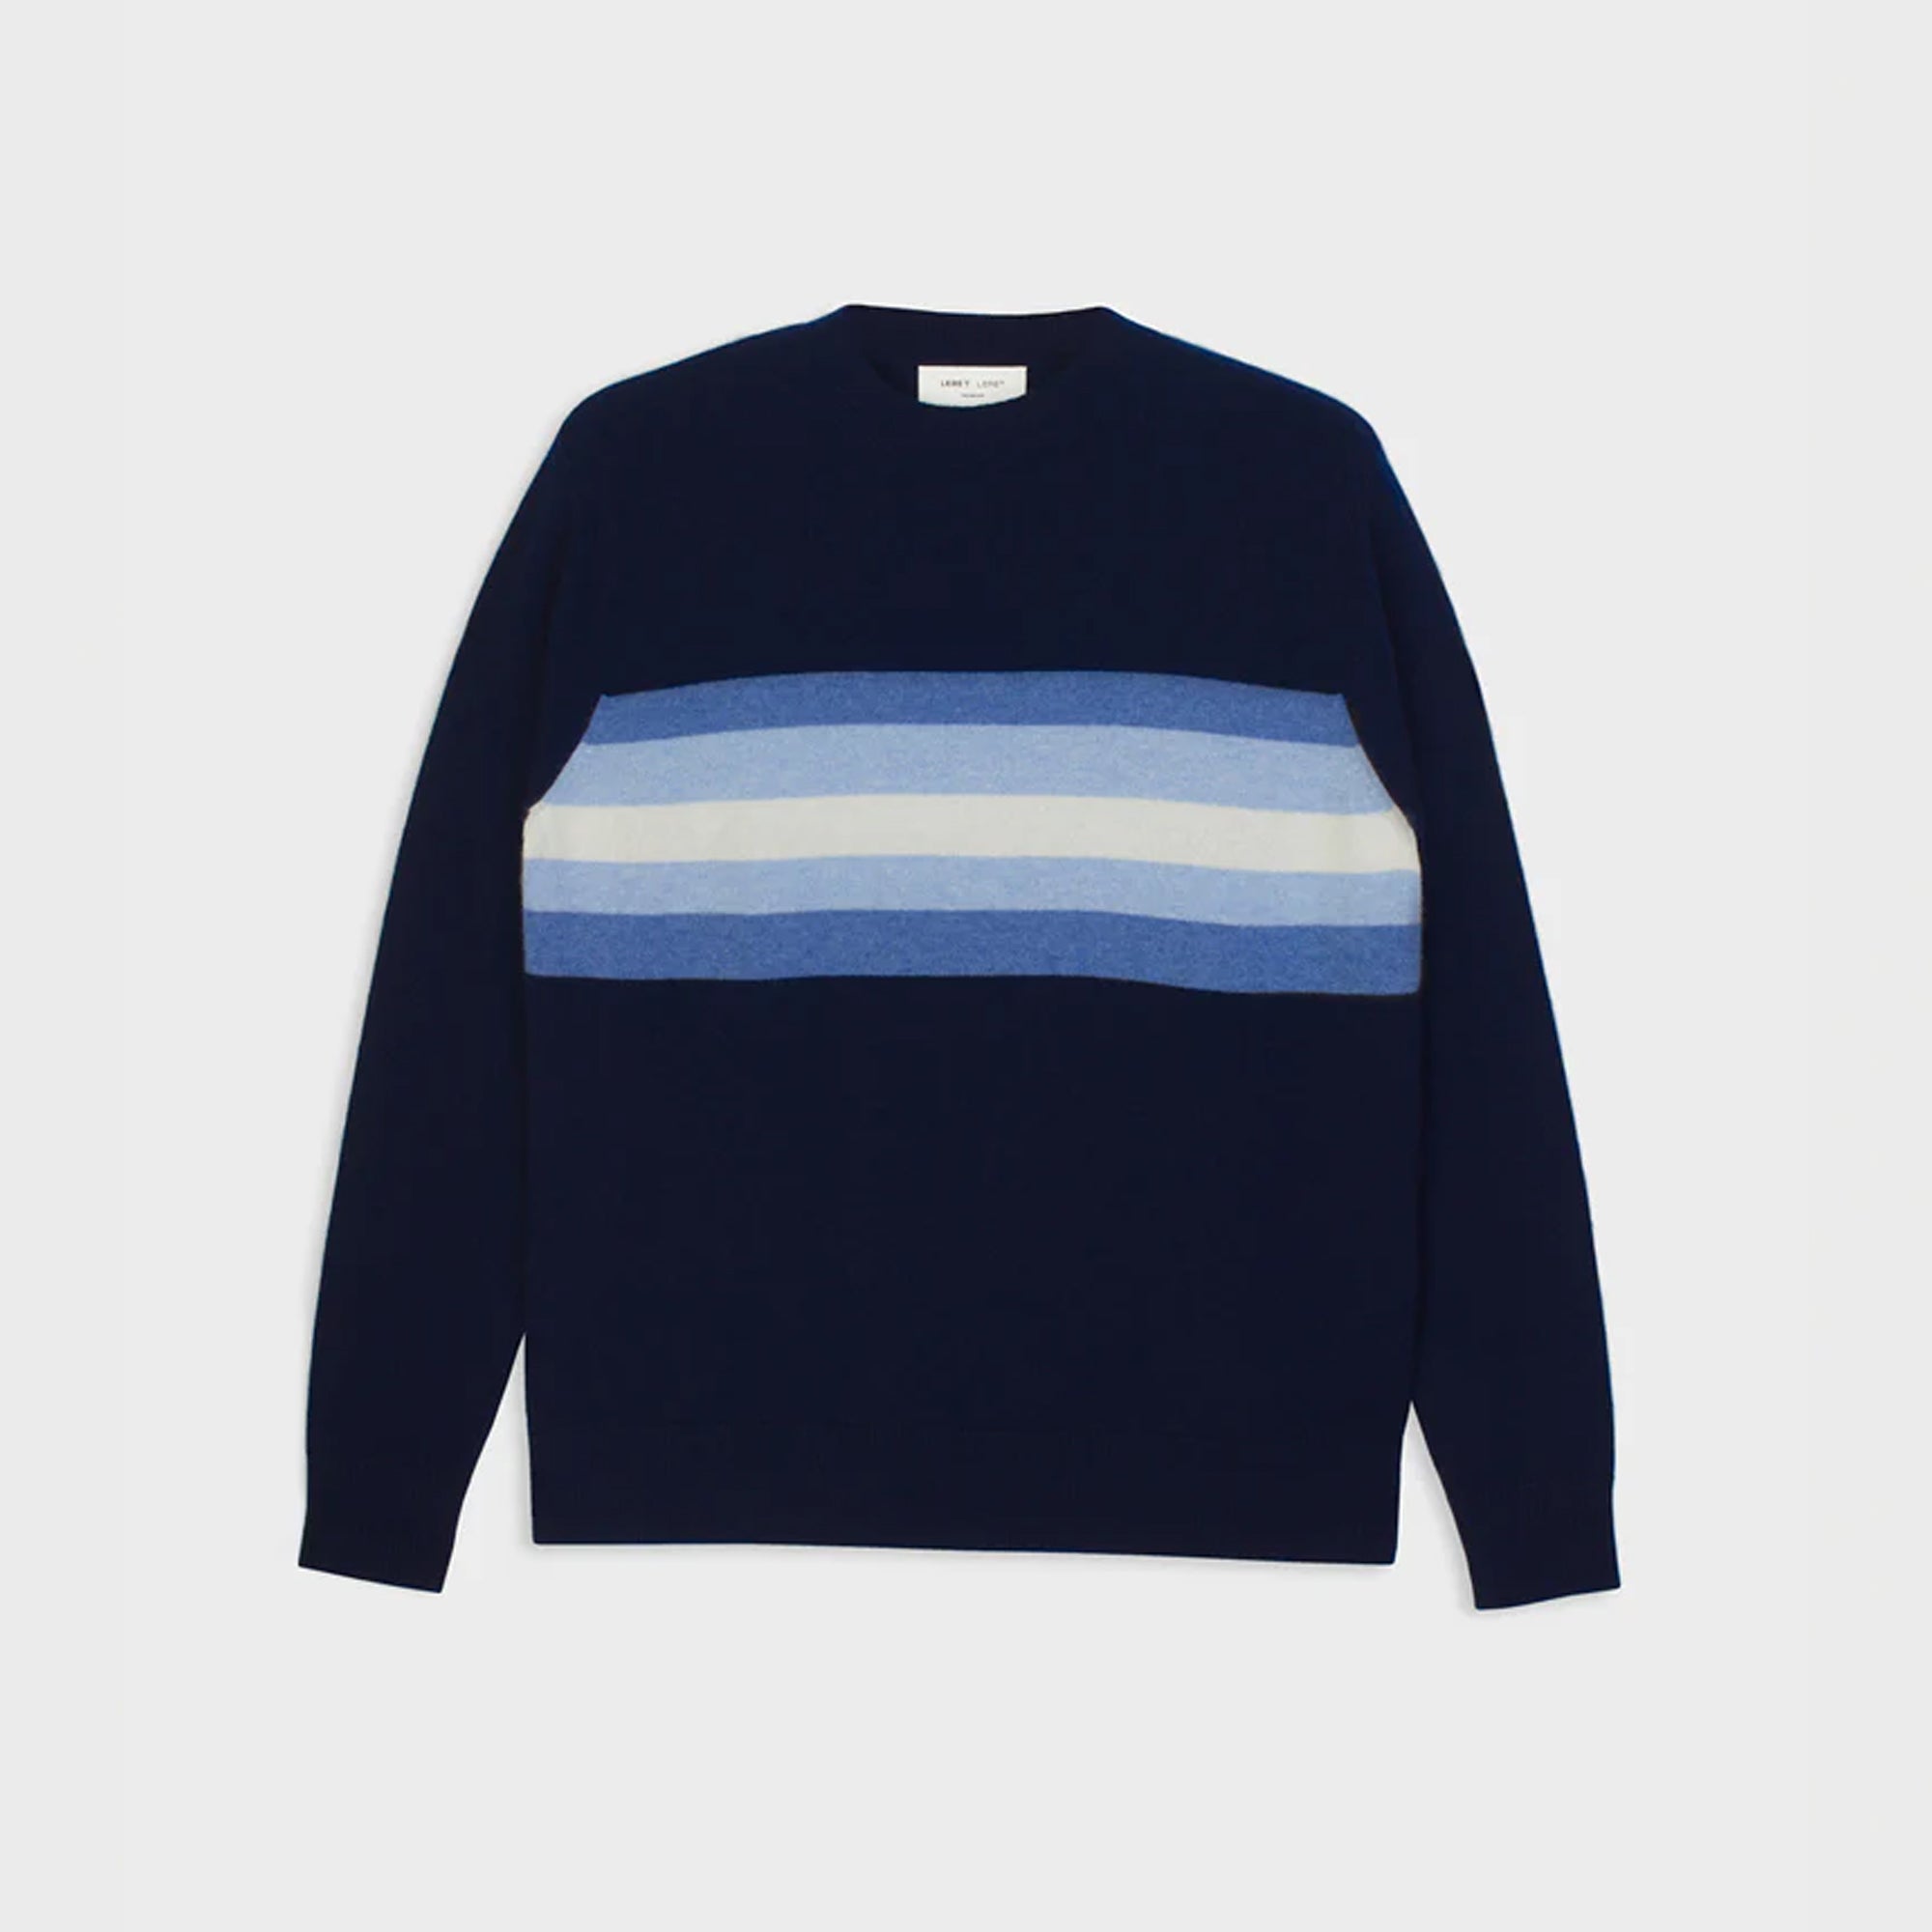 No. 07 Shades of Blue Sweater